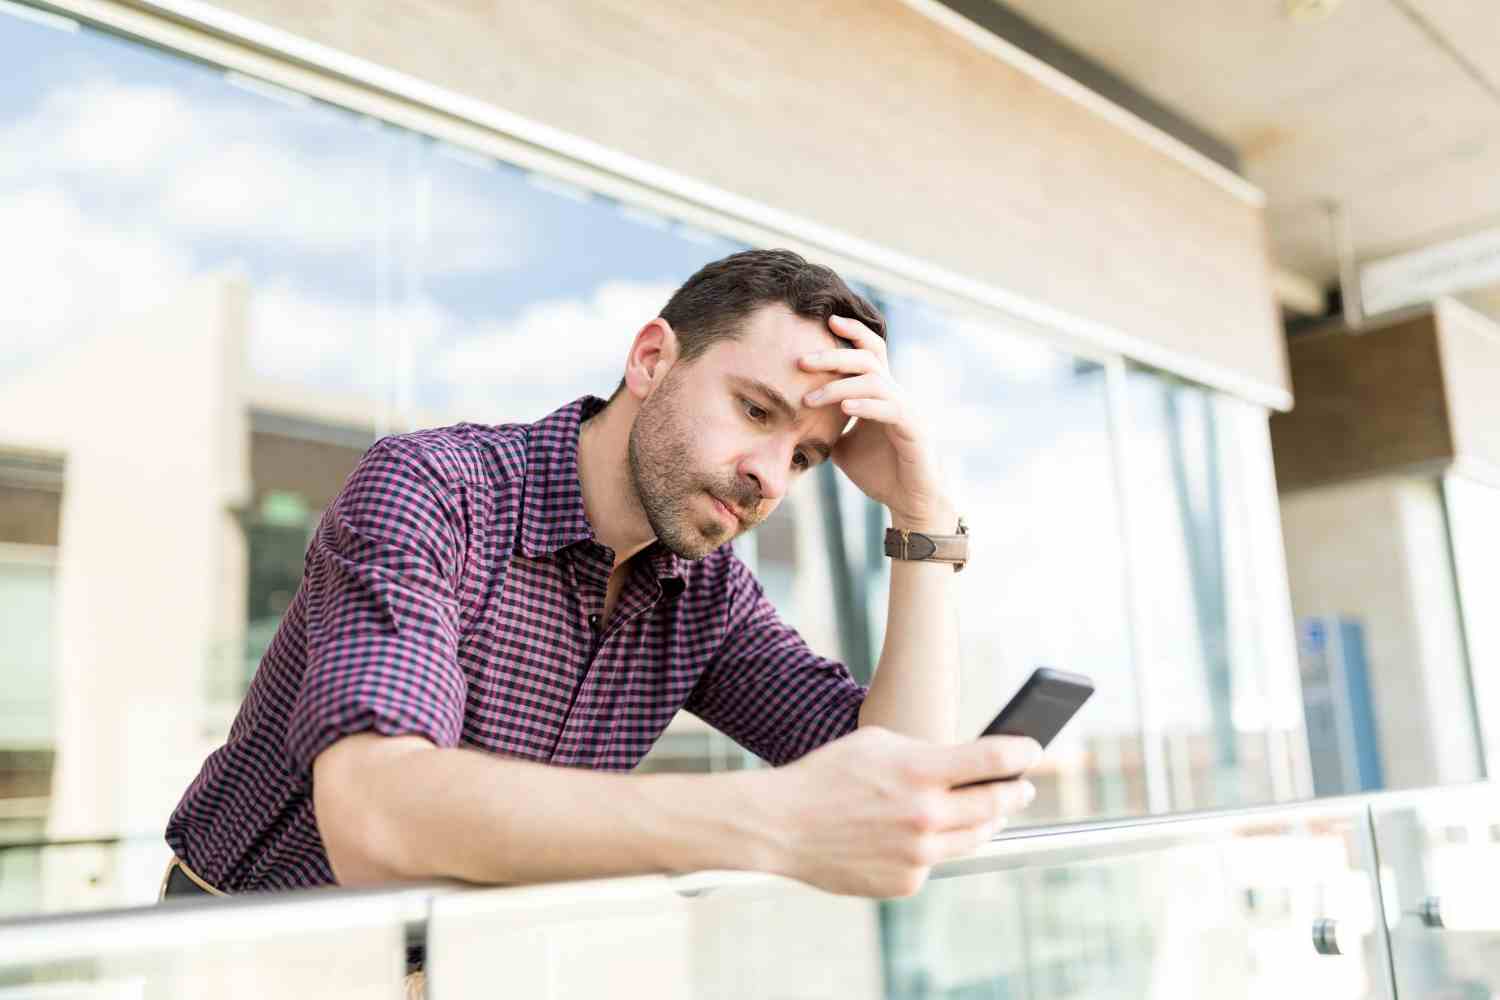 tensed man reading distressing news smartphone while leaning railing shopping mall